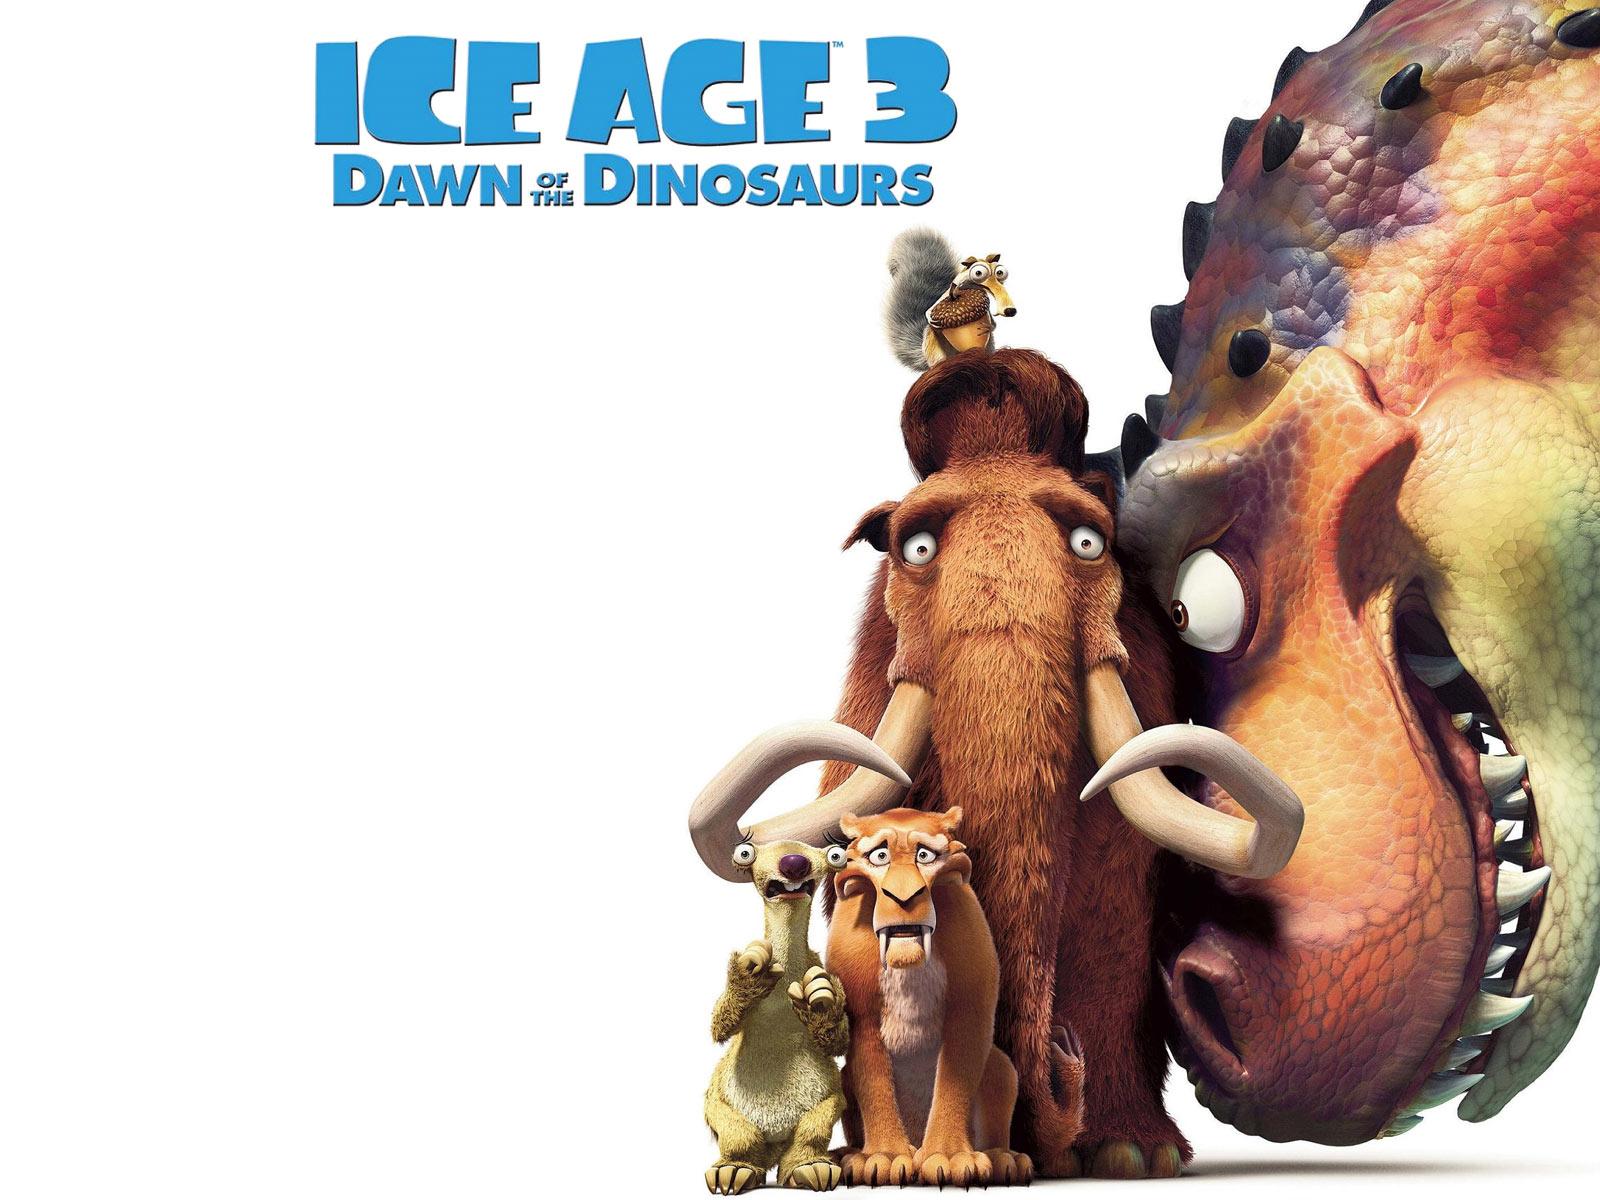 ICE Age 3 widescreen wallpaper